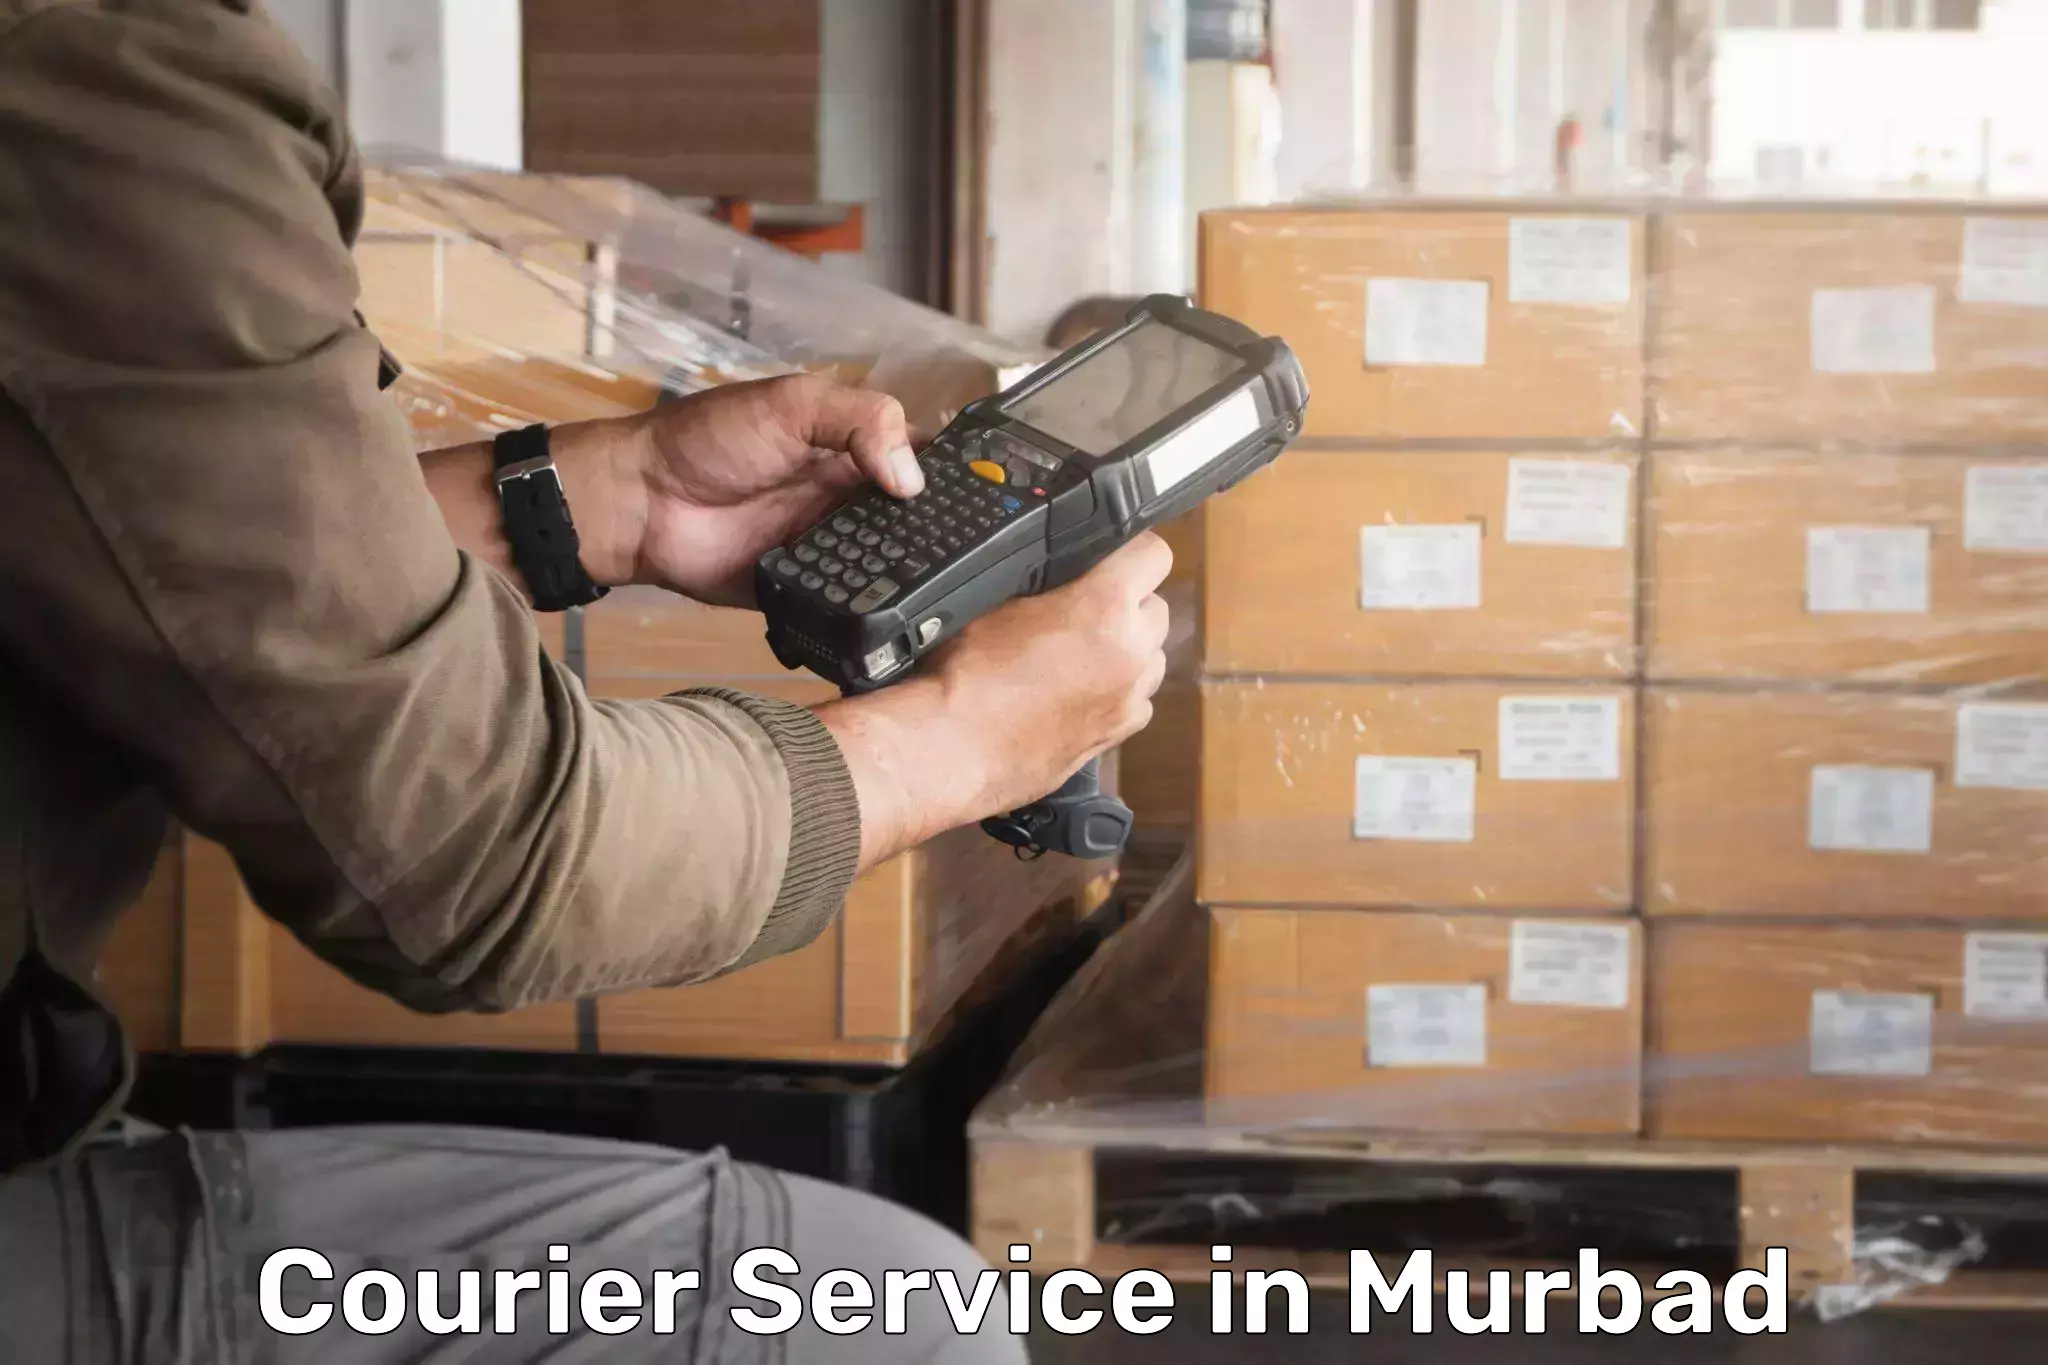 Modern courier technology in Murbad